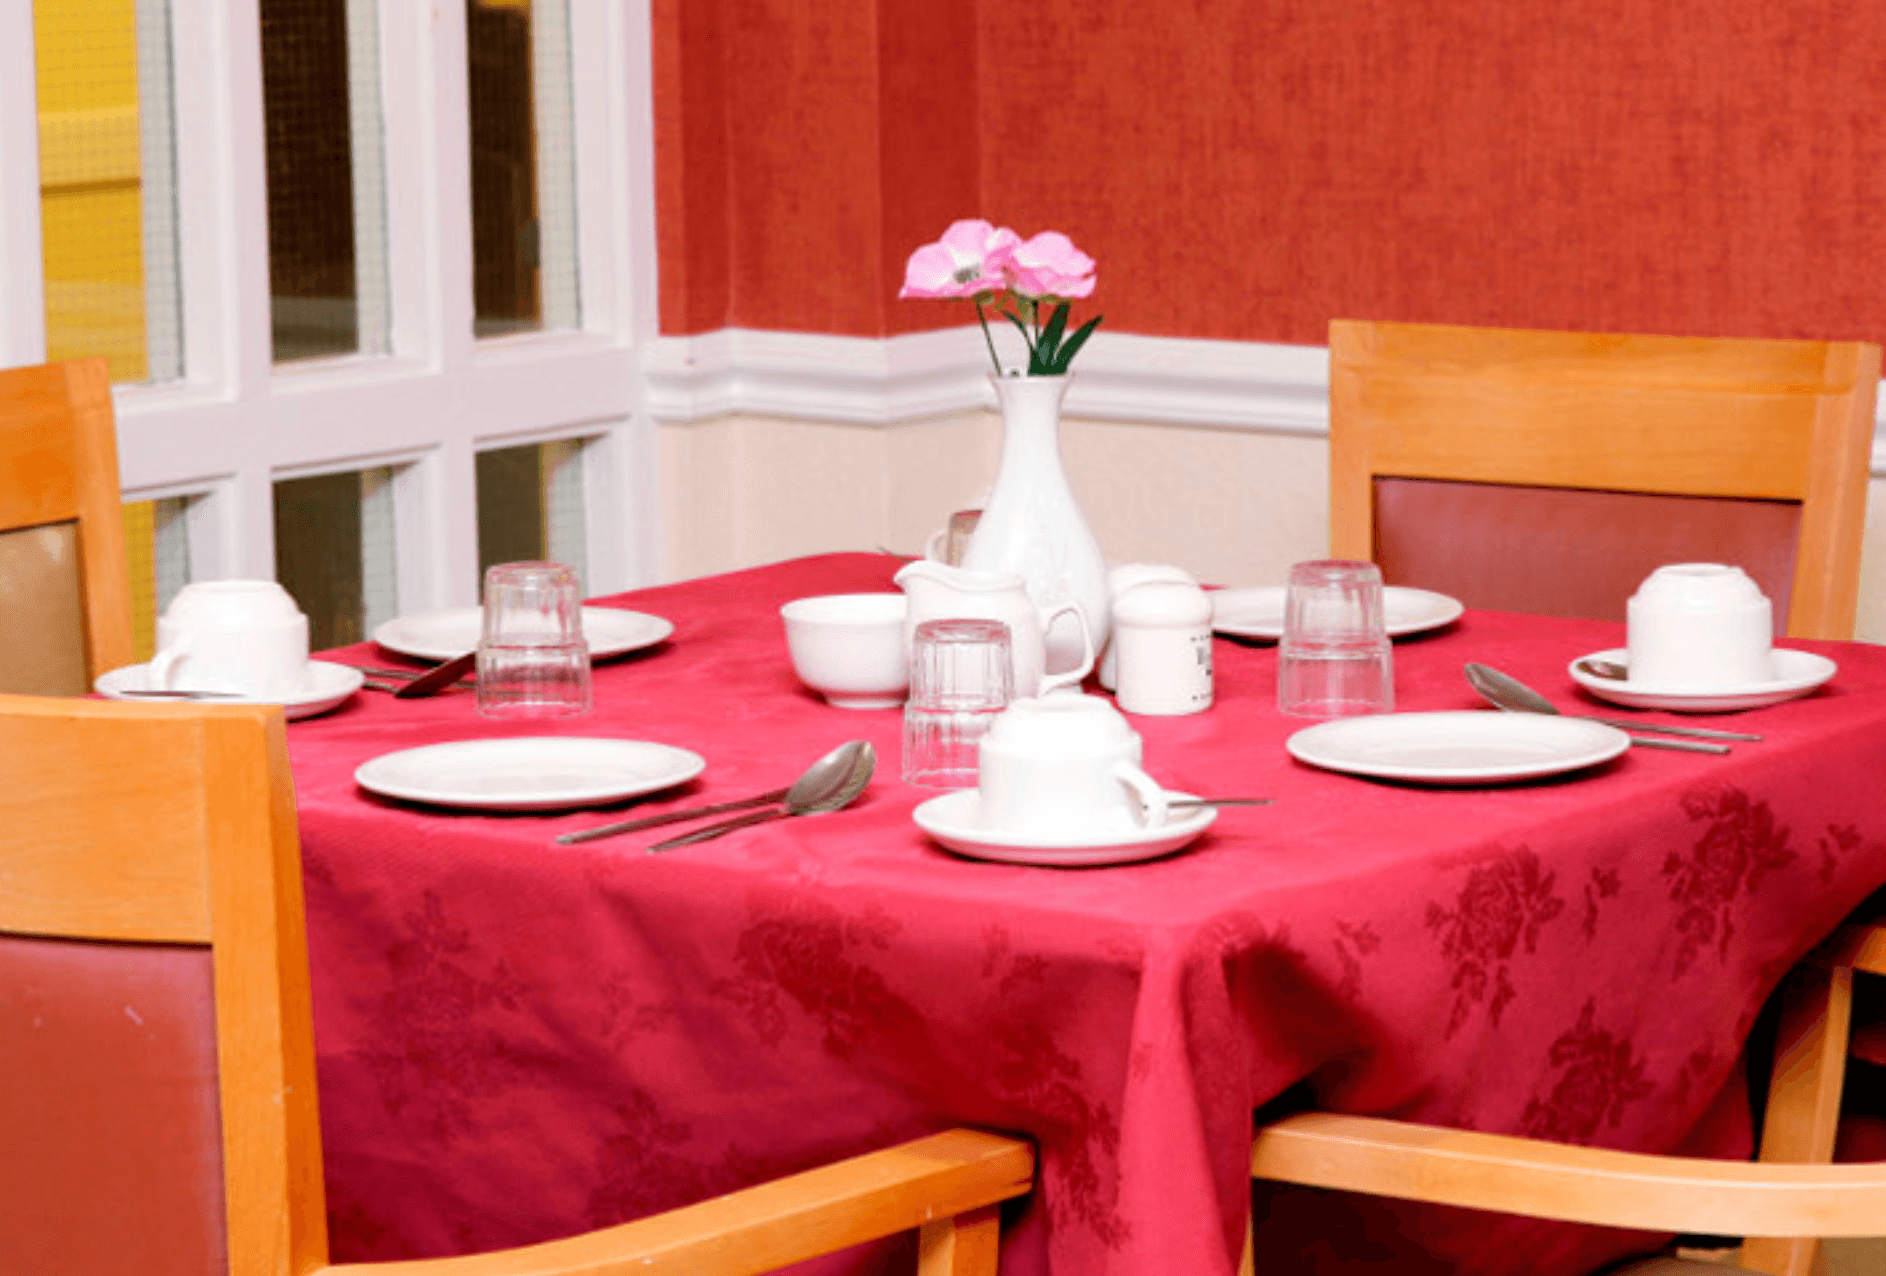 Dining room of Millview care home in Barrhead, Scotland